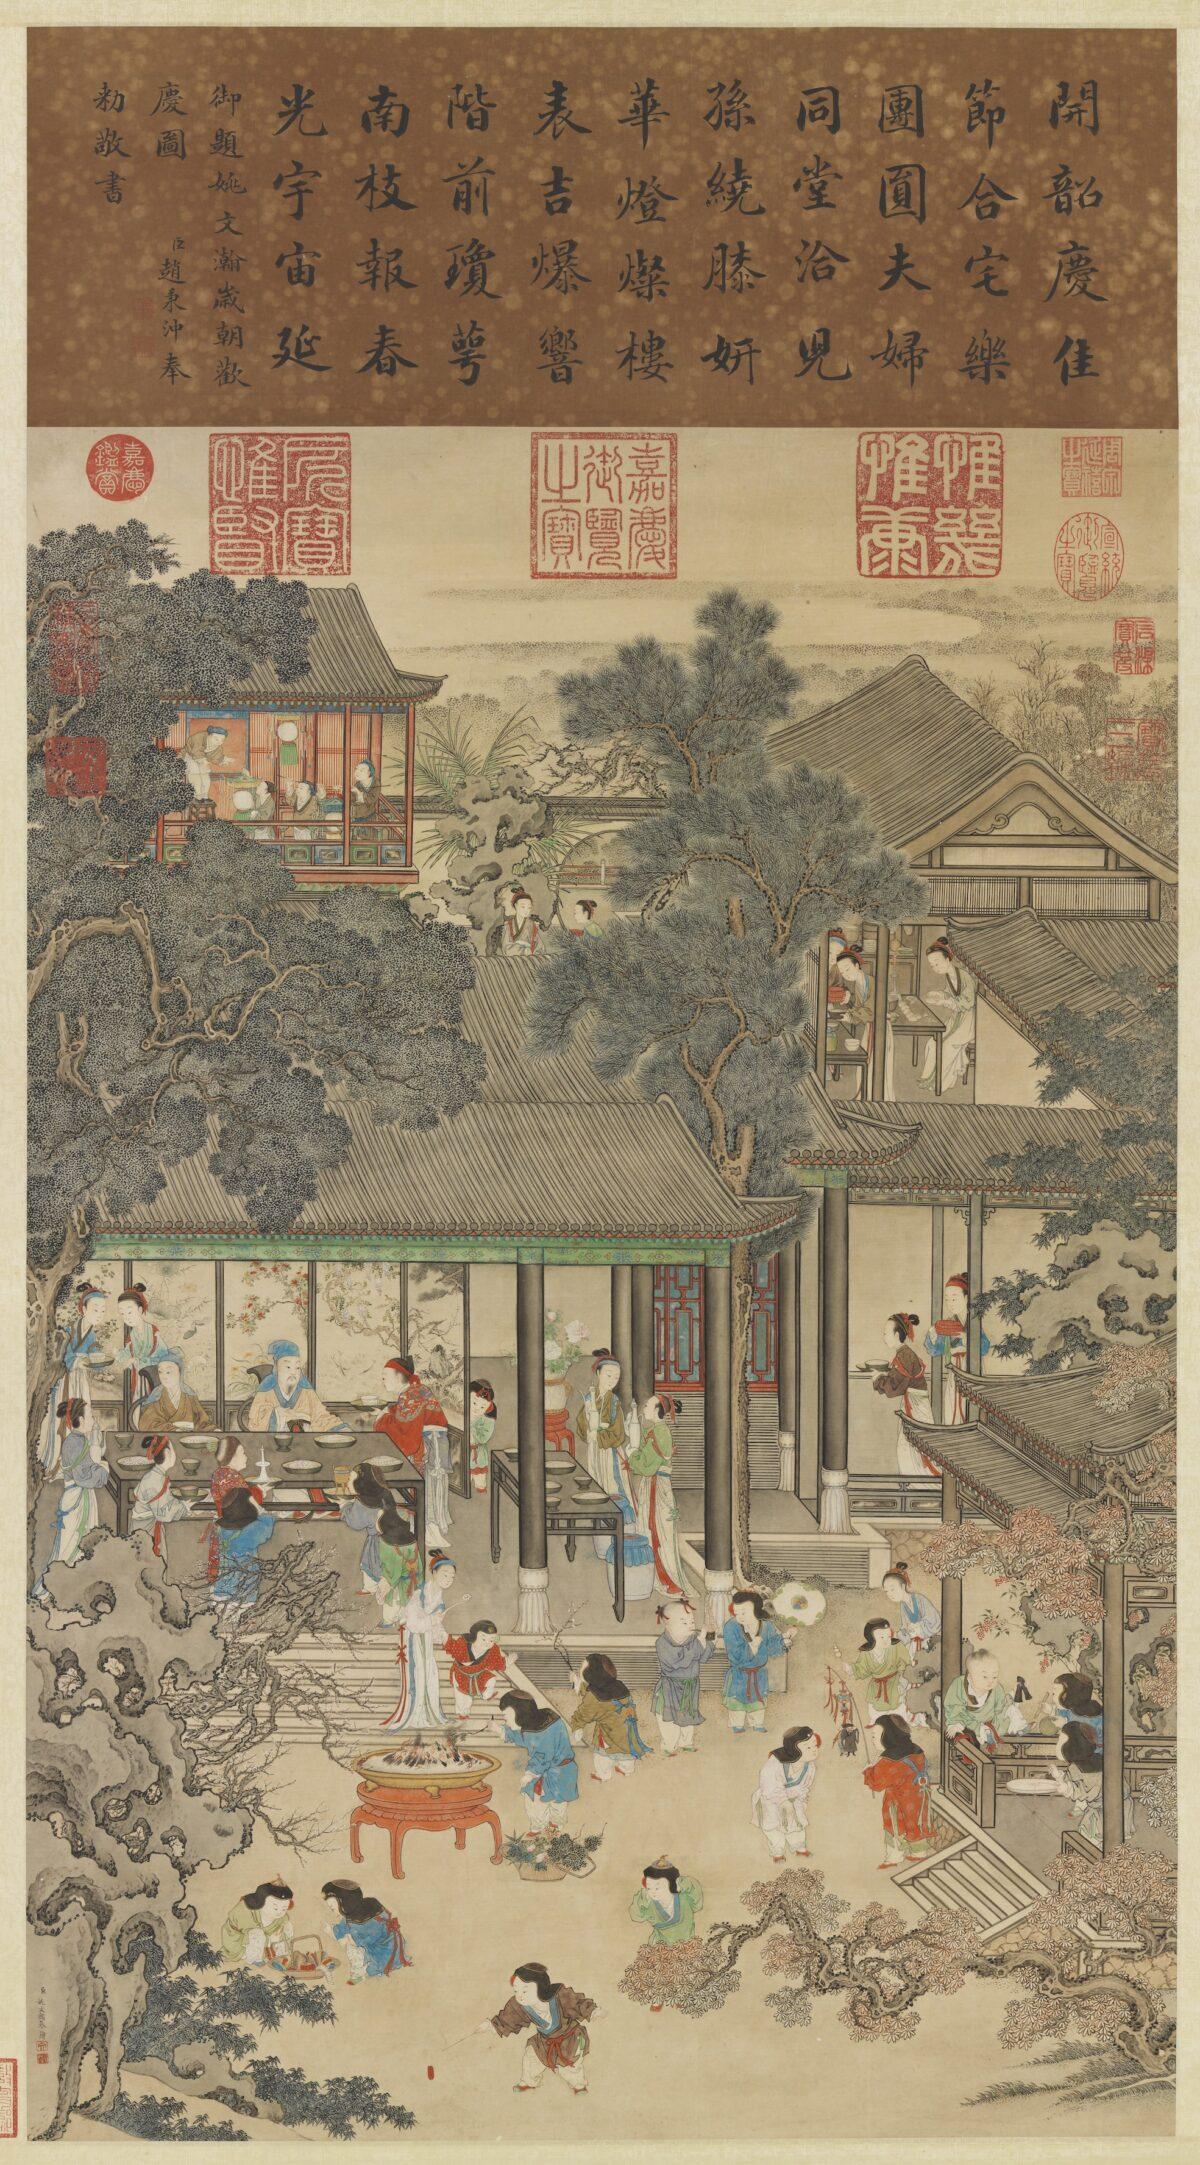 Yao Wenhan’s “A Celebration of Chinese New Year” in 18th-century China. (Taipei National Palace Museum)